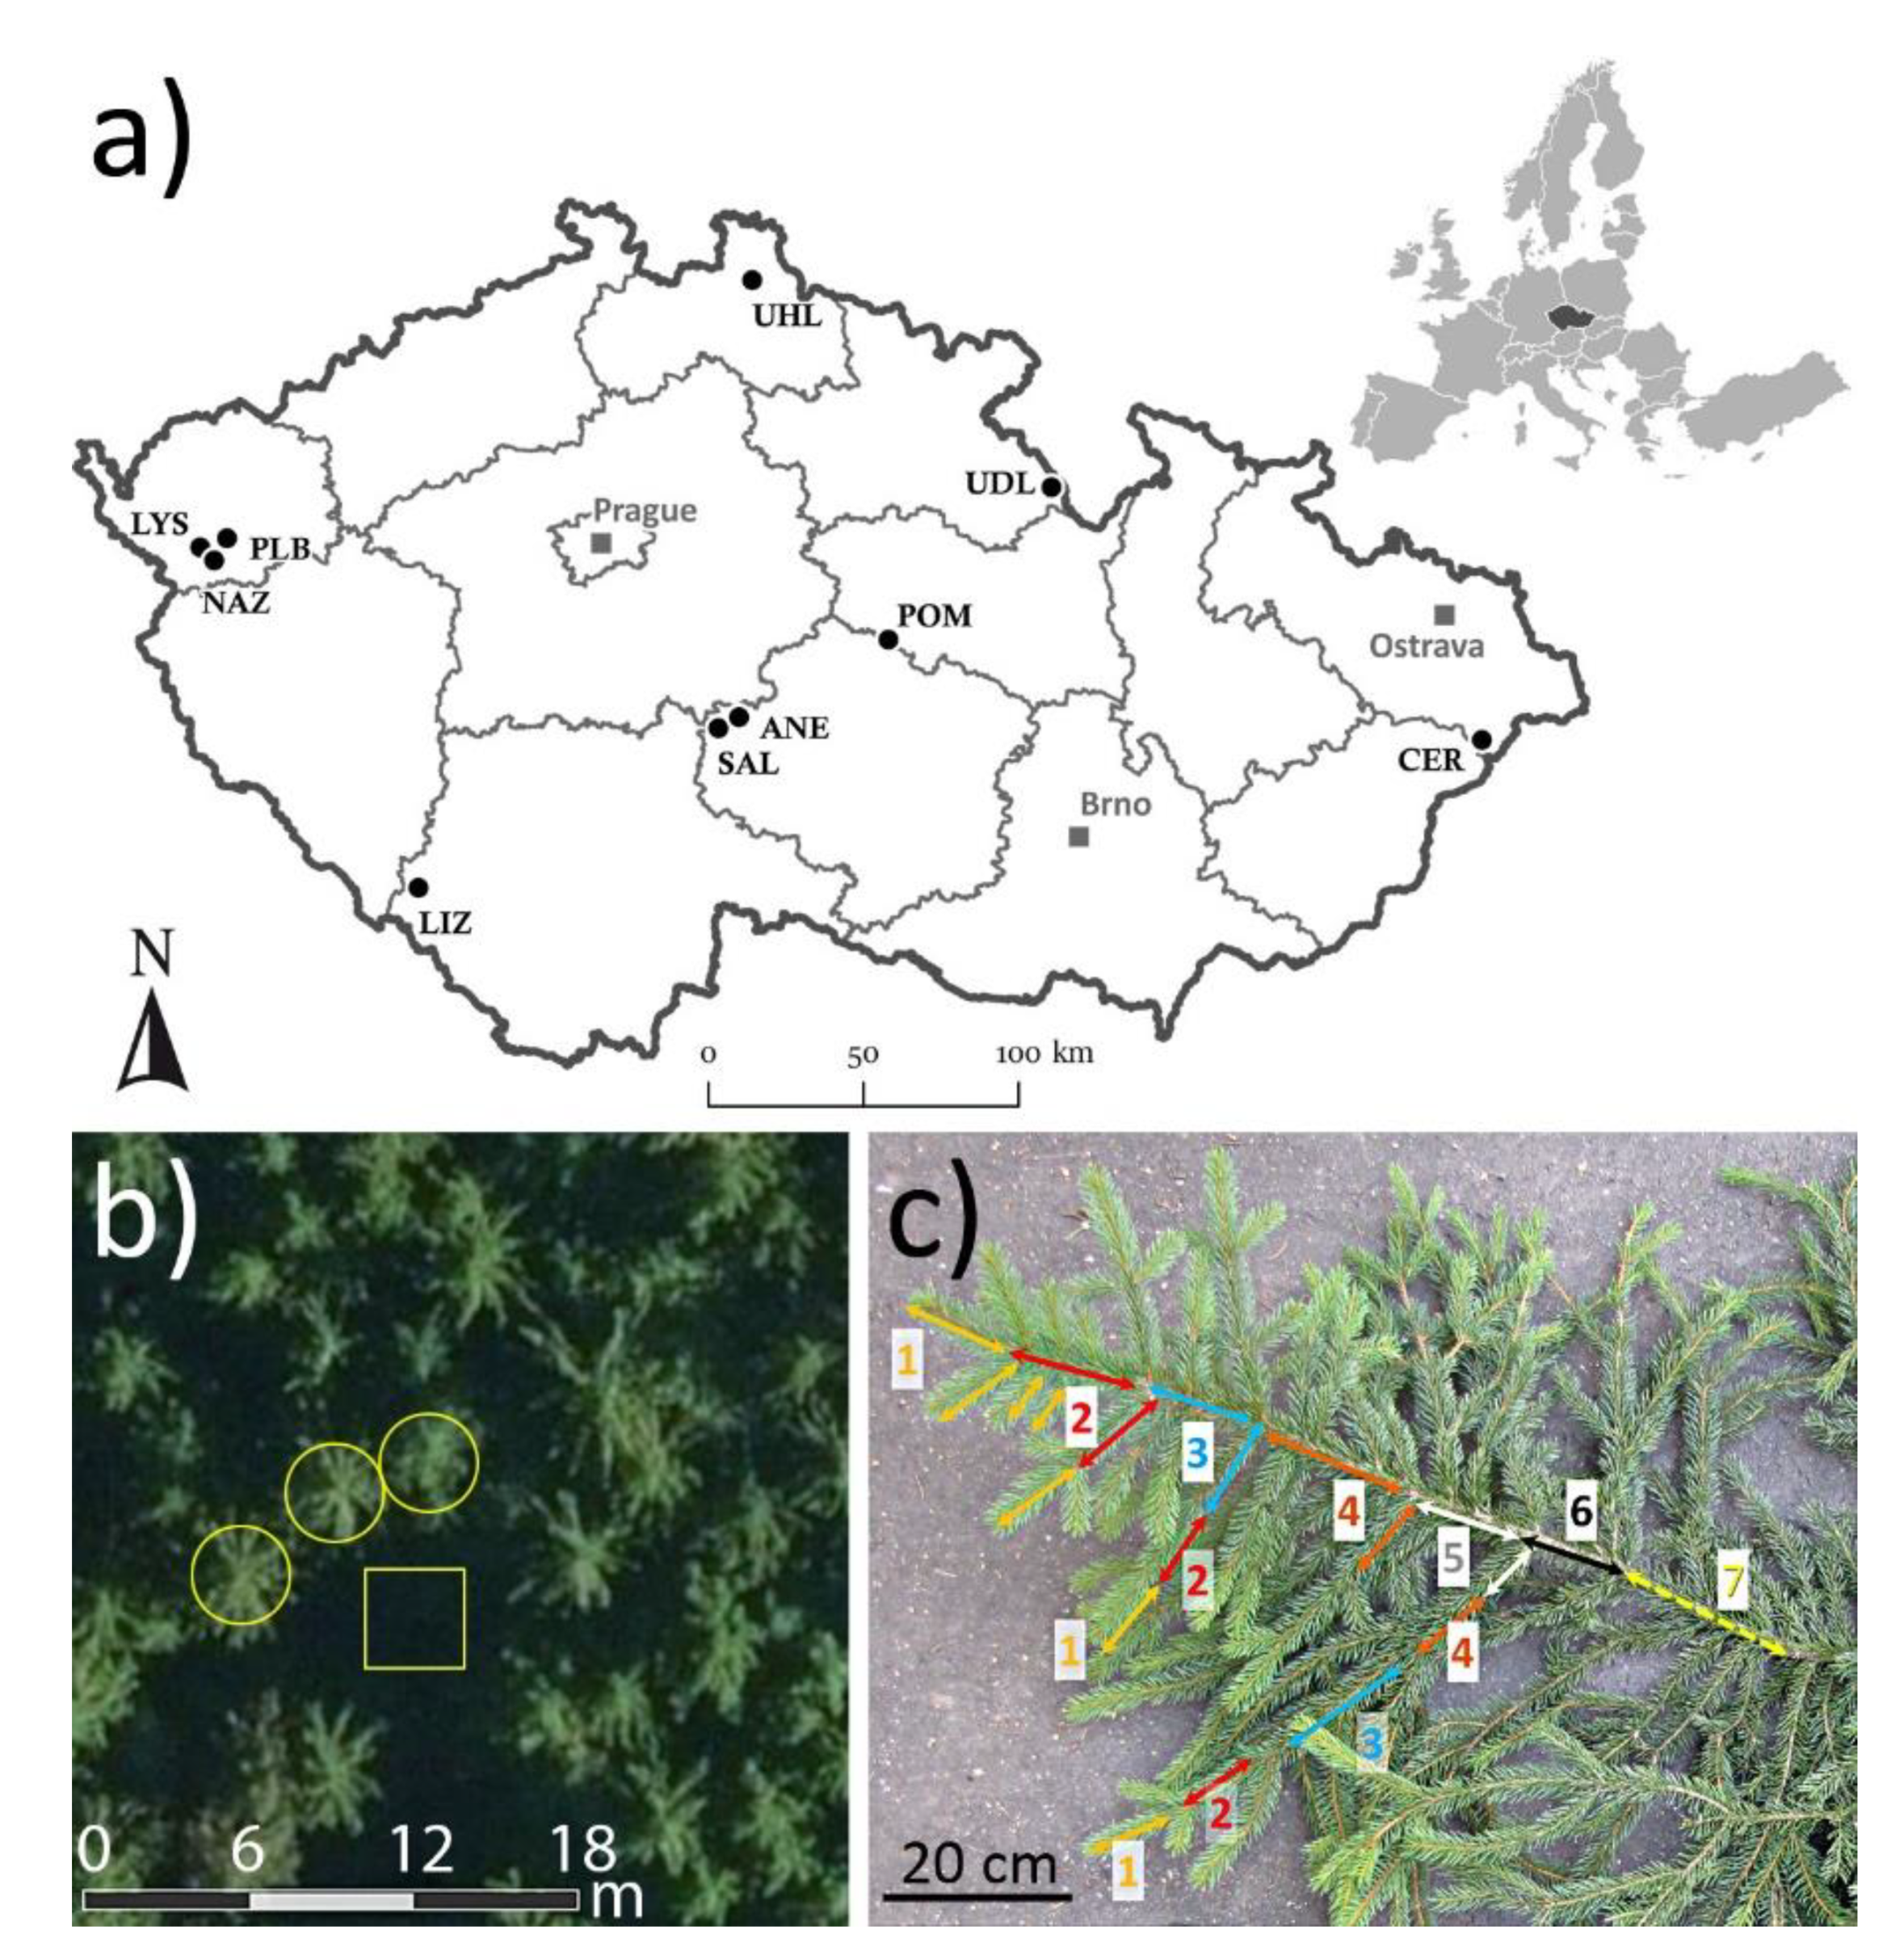 Remote Sensing | Free Full-Text | Foliage Biophysical Trait Prediction from  Laboratory Spectra in Norway Spruce Is More Affected by Needle Age Than by  Site Soil Conditions